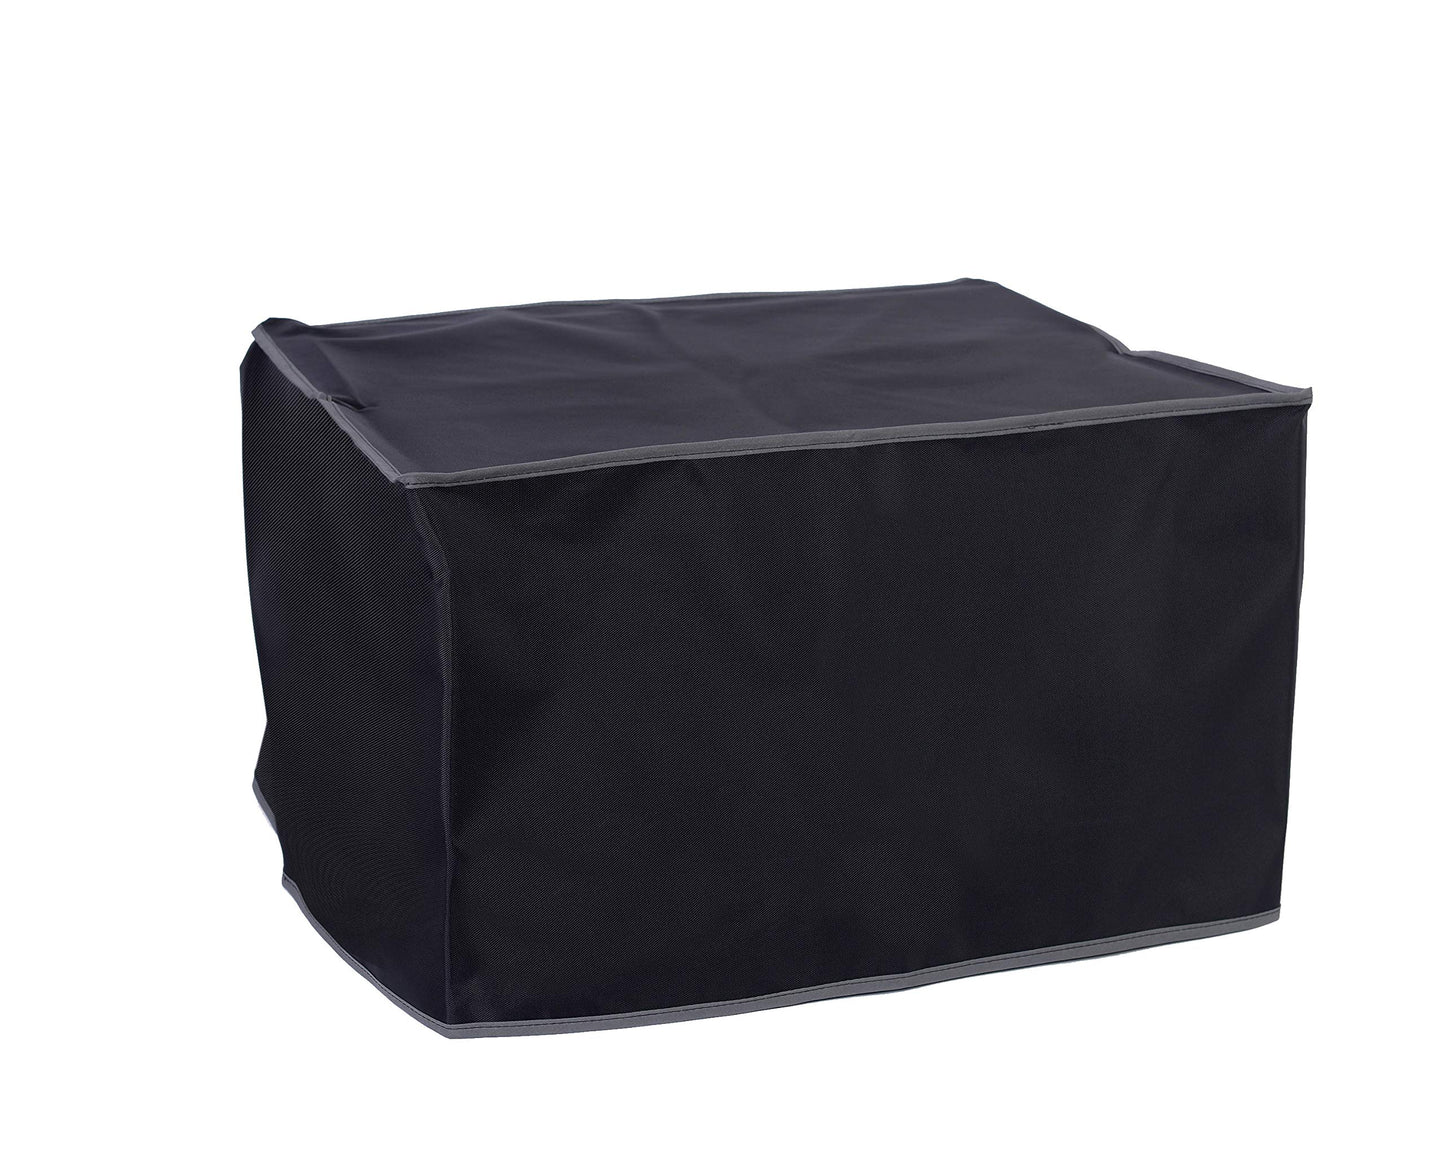 The Perfect Dust Cover, Black Nylon Cover Compatible with HP OfficeJet Pro 6954, HP OfficeJet Pro 6968 and HP OfficeJet Pro 6978 e-All-in-One Printers, Anti Static Cover by The Perfect Dust Cover LLC